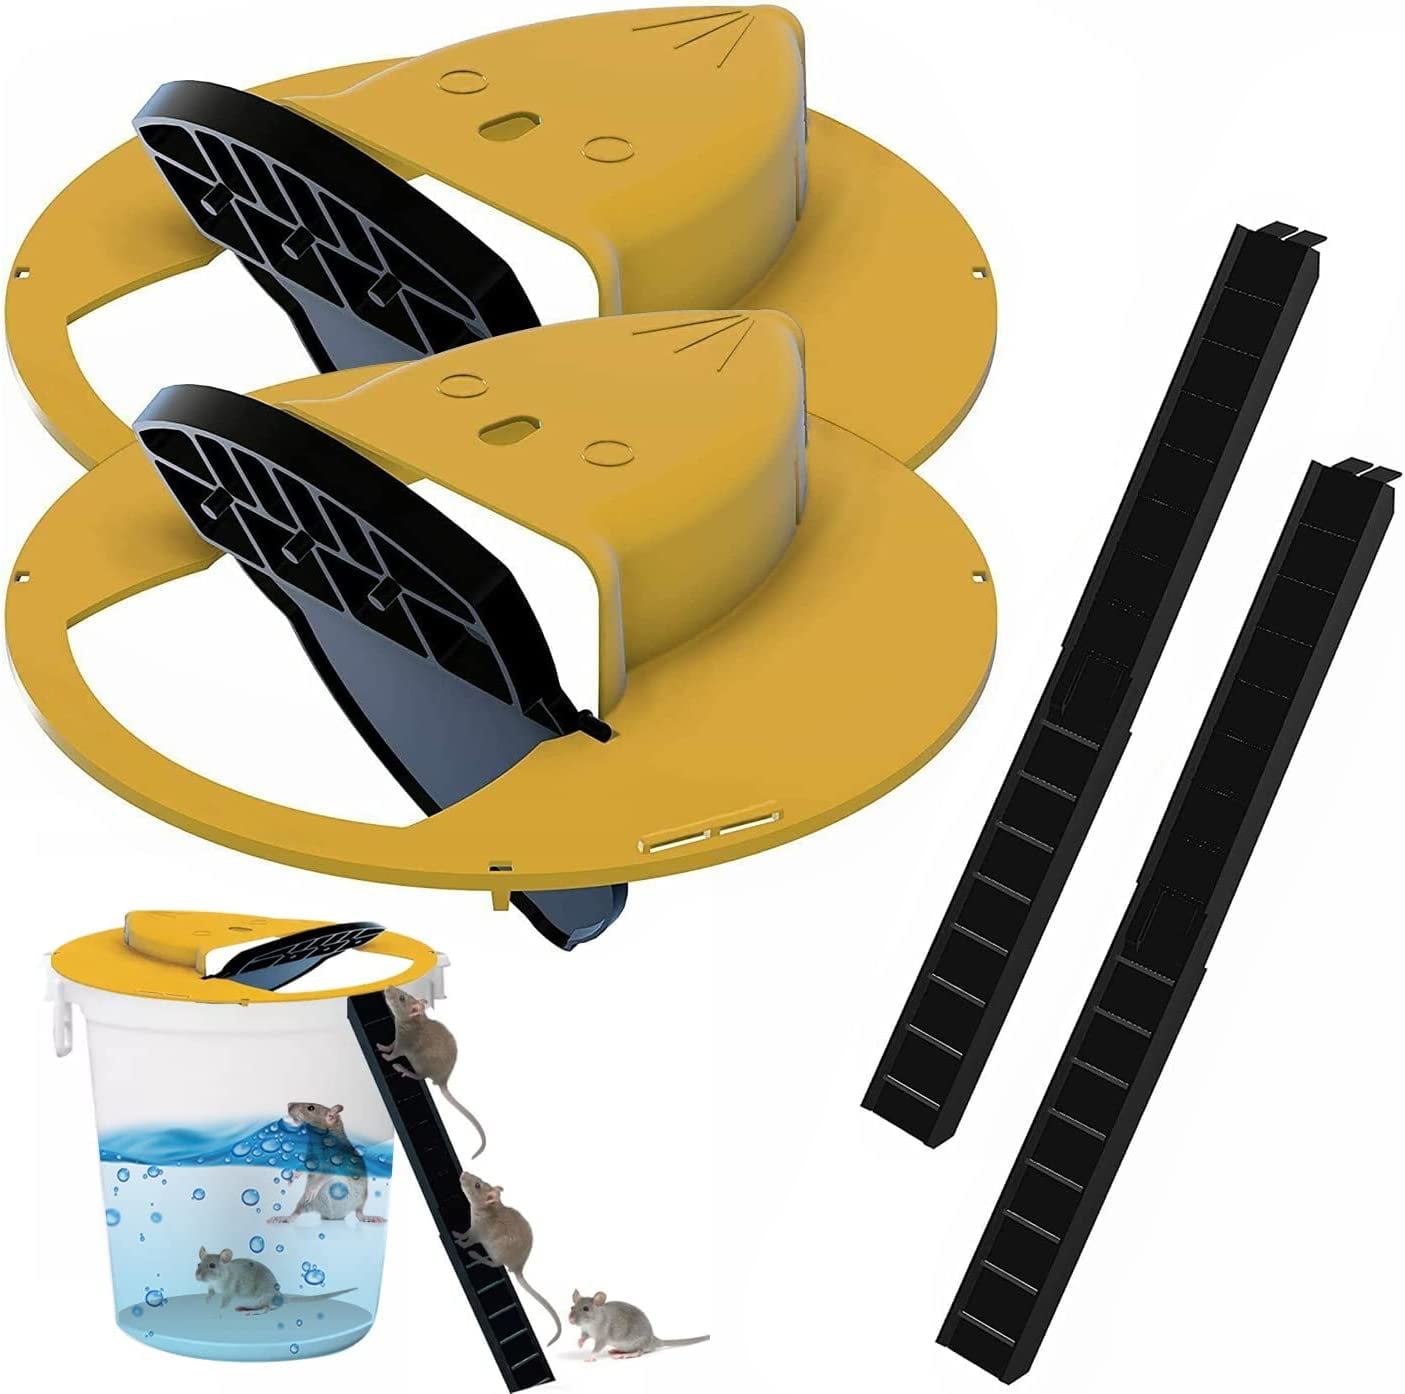 5 Gallon Bucket Lid Mouse Rat Trap 4 Pack- Automatic Reset Flip and Slide  Mouse